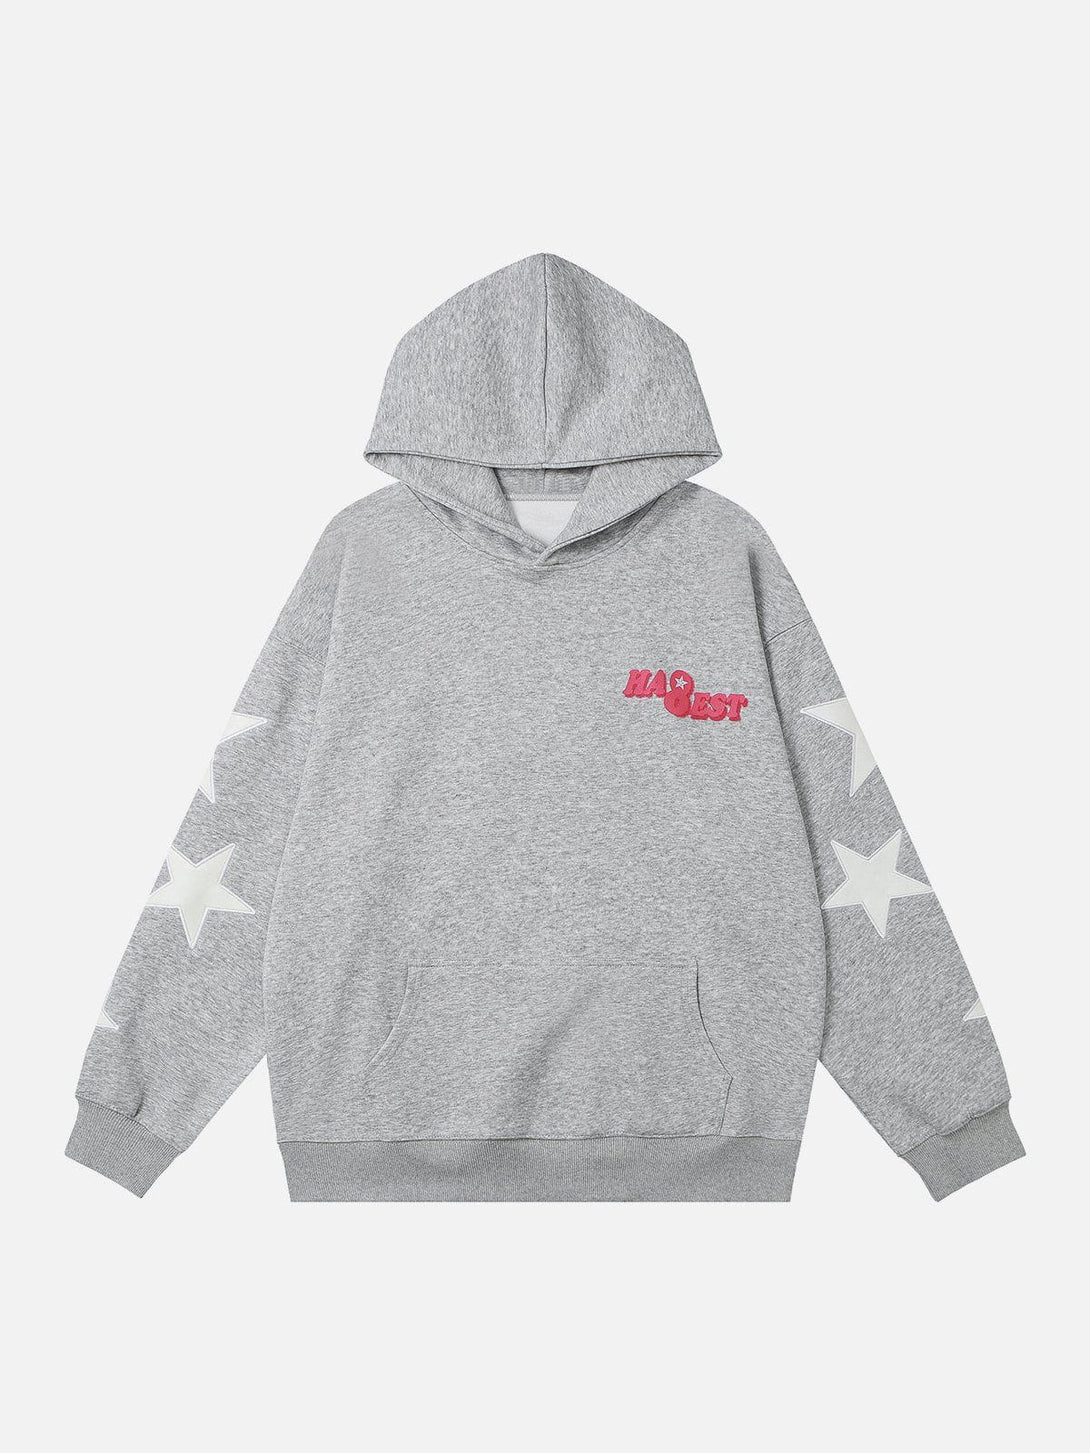 AlanBalen® - Letter Printing Star Embroidery Hoodie